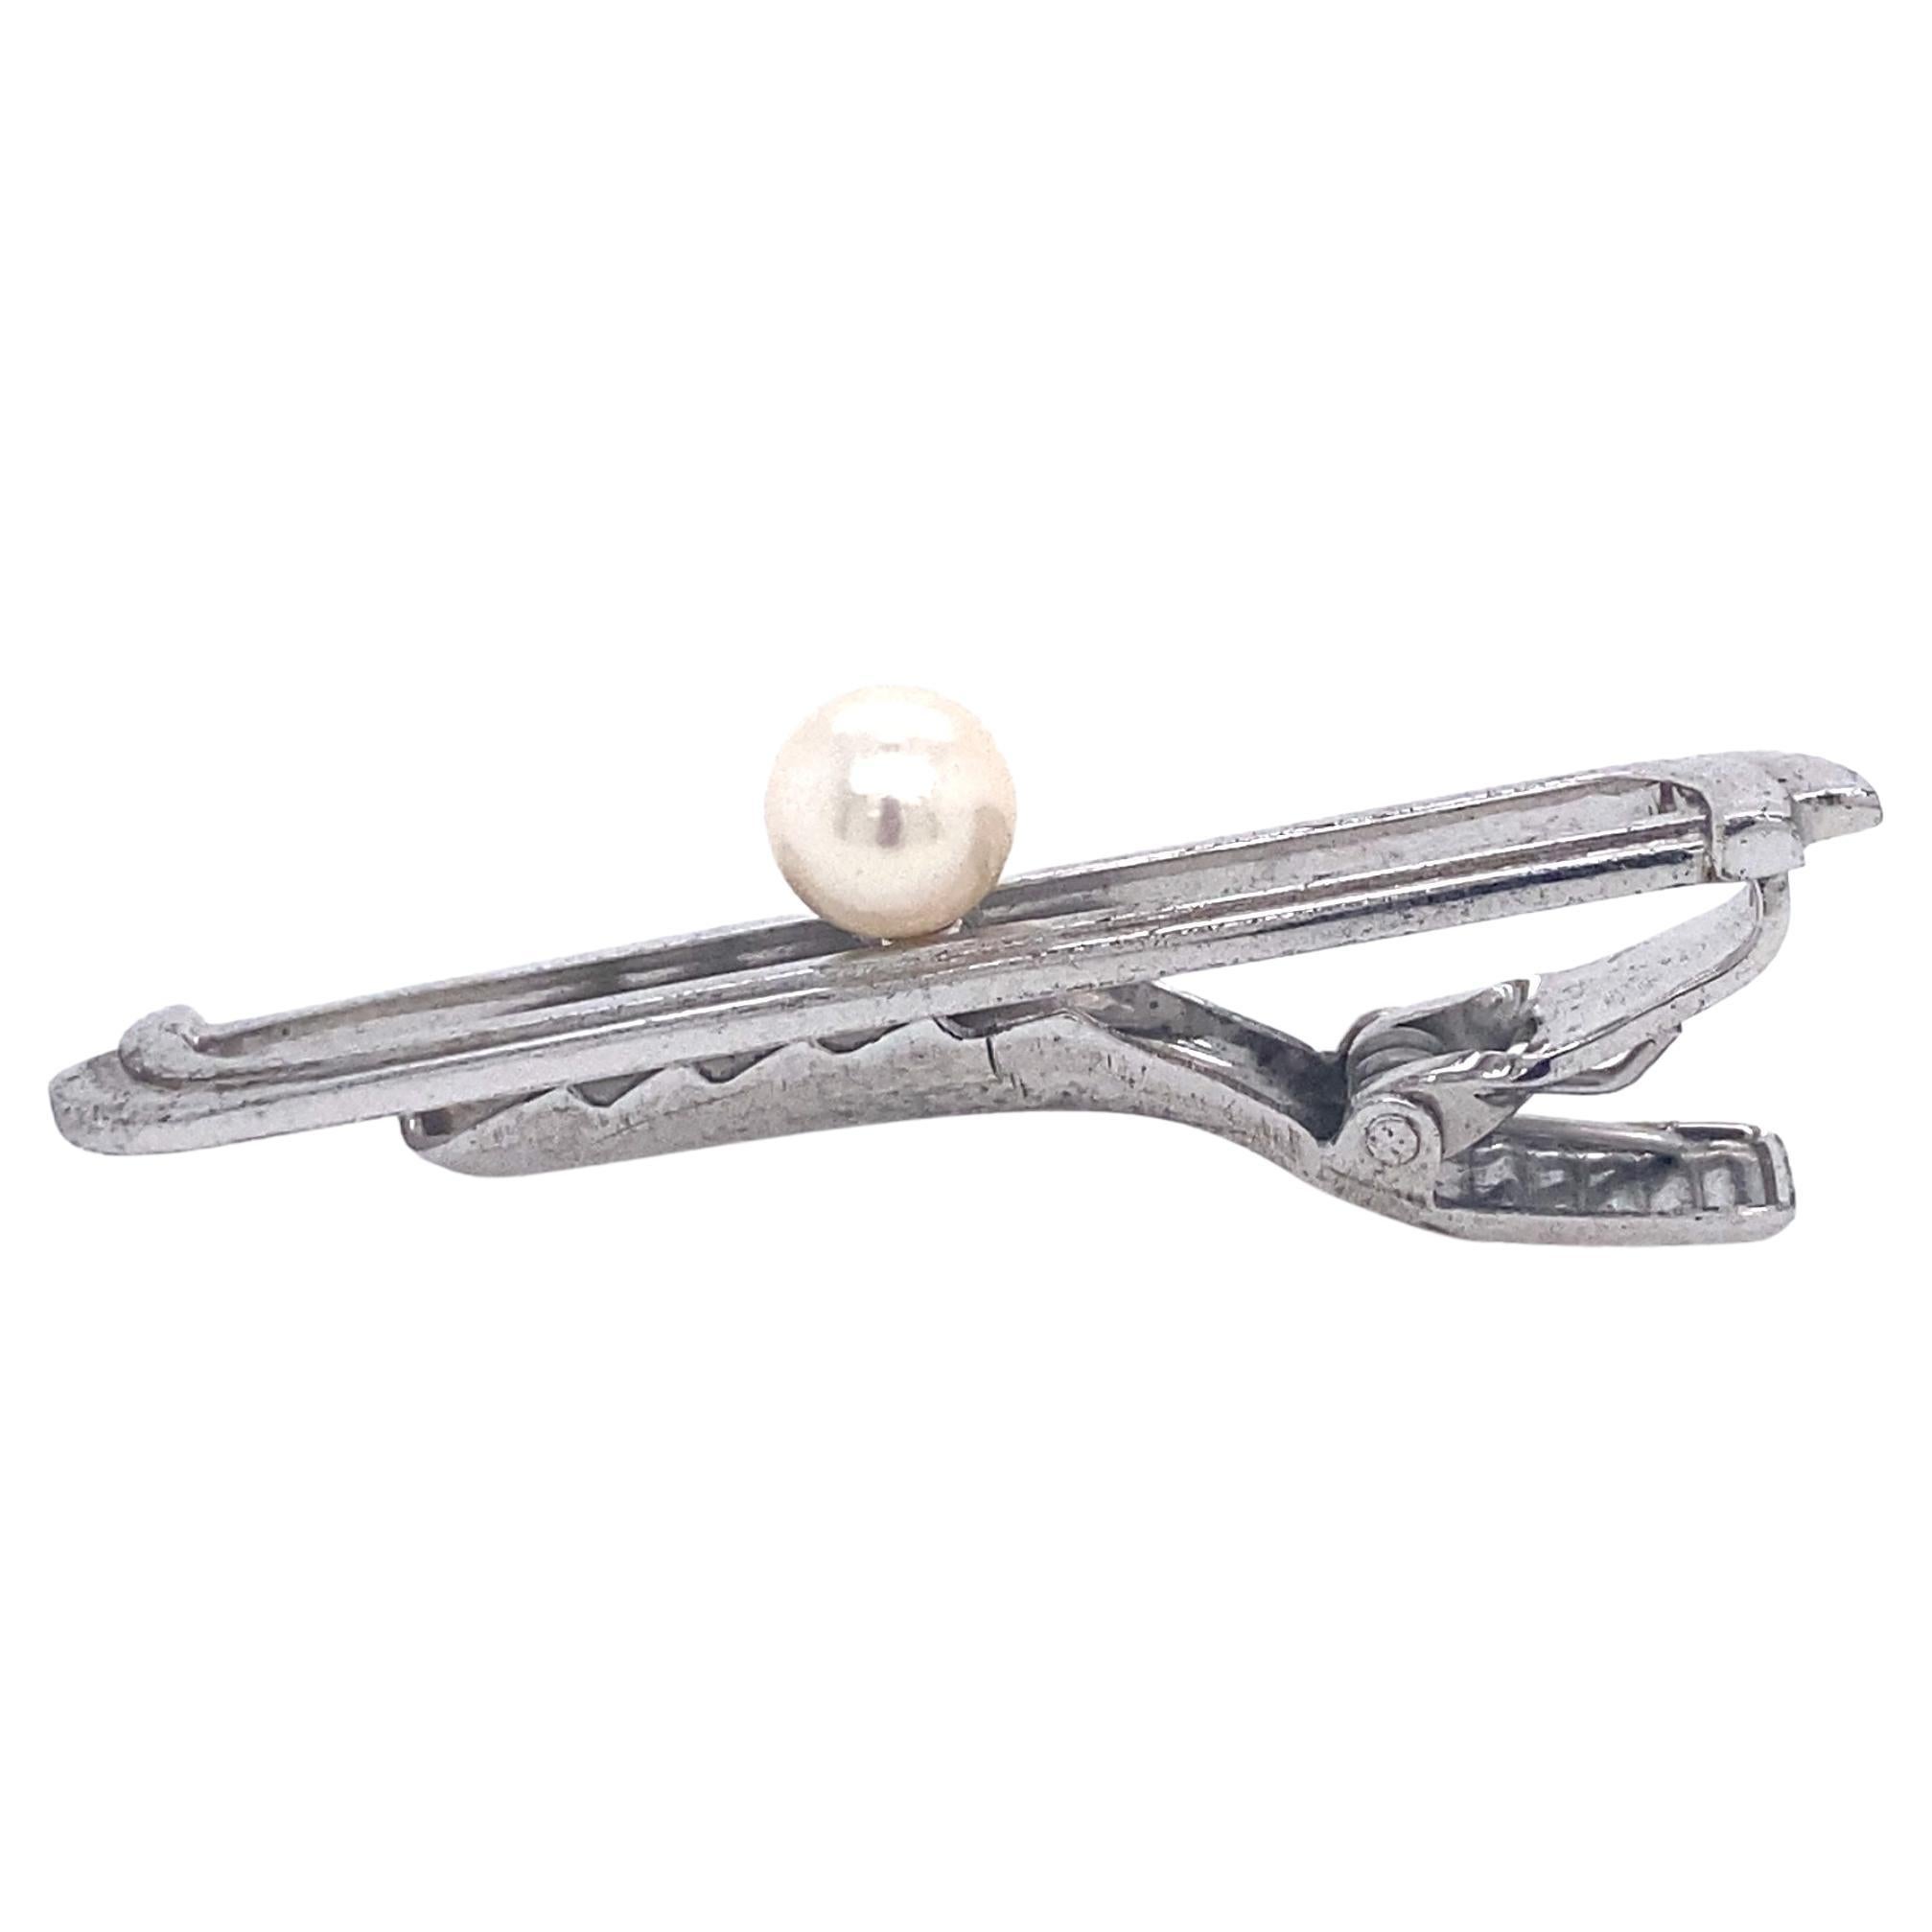 Mikimoto Estate Akoya Pearl Tie Bar Sterling Silver 6.73 mm 5.91 Grams M172

This elegant Authentic Mikimoto Estate Akoya pearl tie bar is made of sterling silver and has 1 Akoya Cultured Pearl in size of 6.73 mm with a weight of 5.91